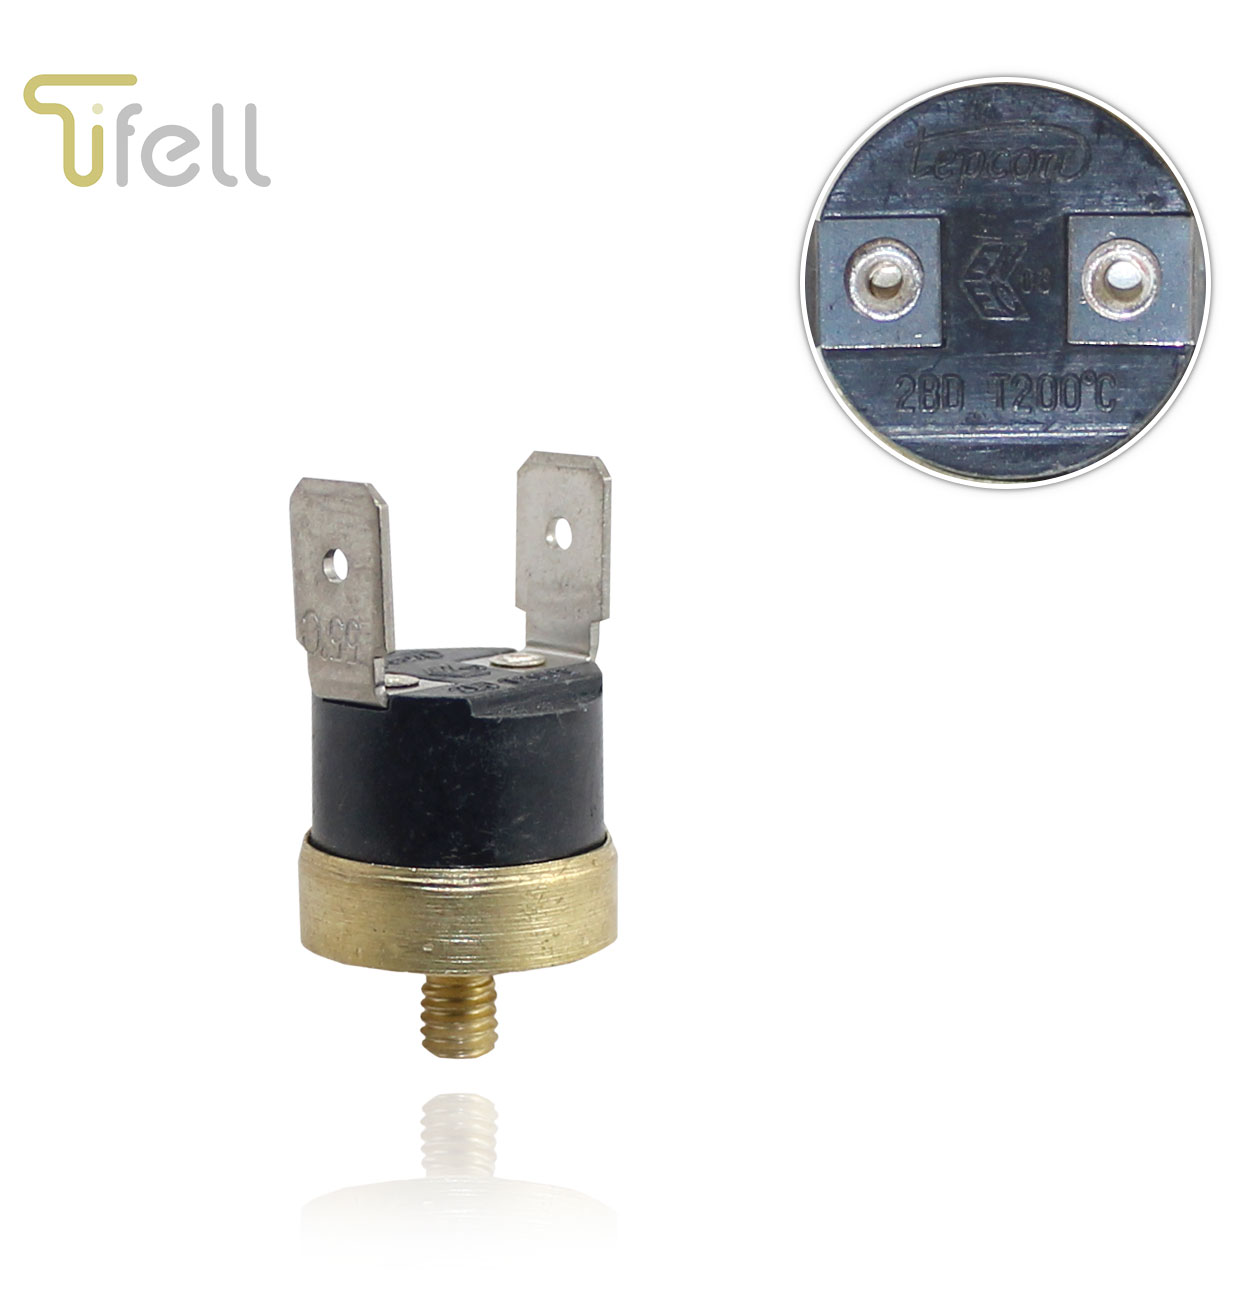 55 M4 TIFELL CONTACT THERMOSTAT